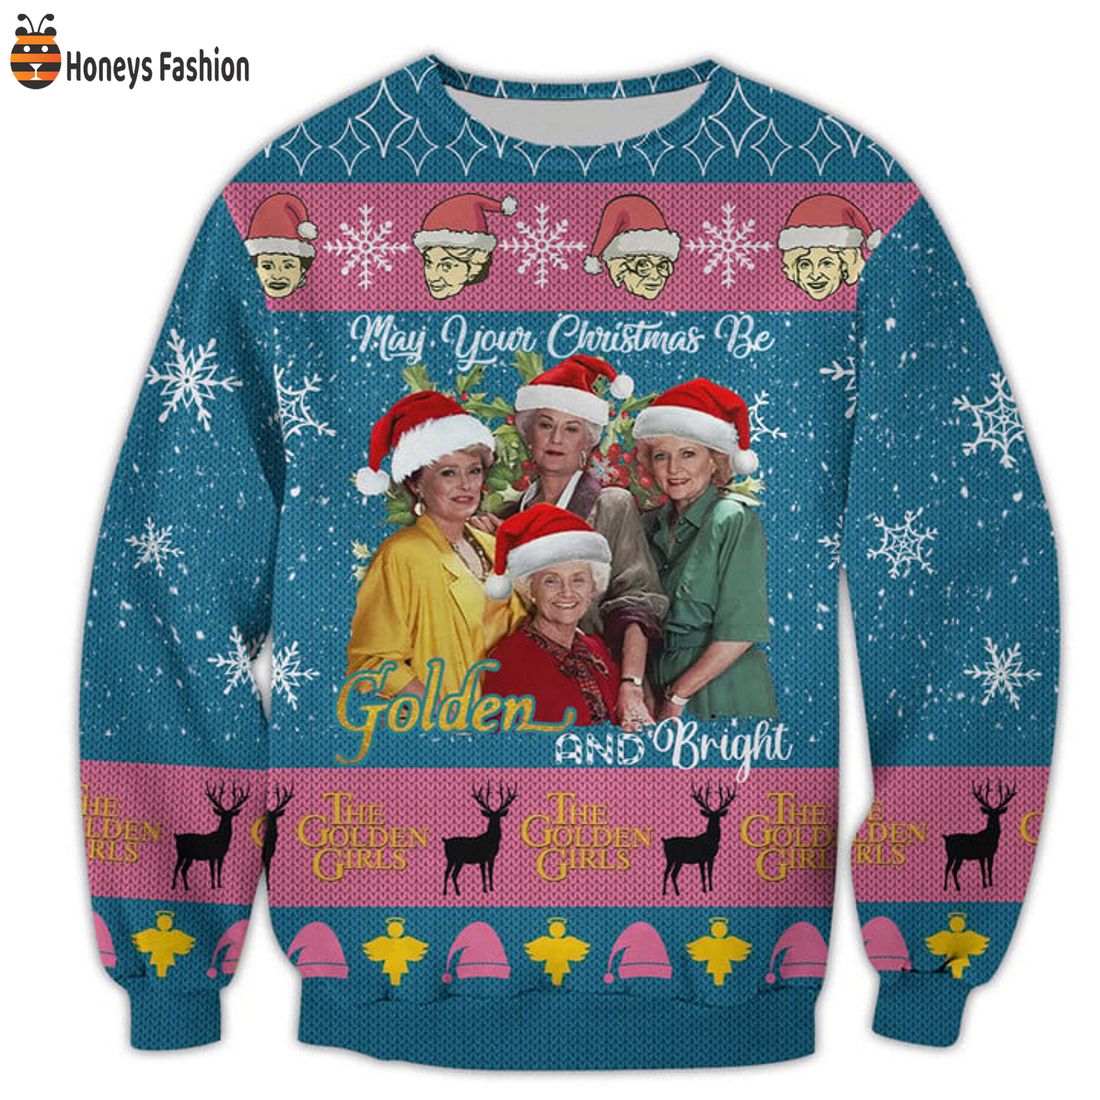 TRENDING The Golden Girls may your christmas be golden and bright ugly sweater